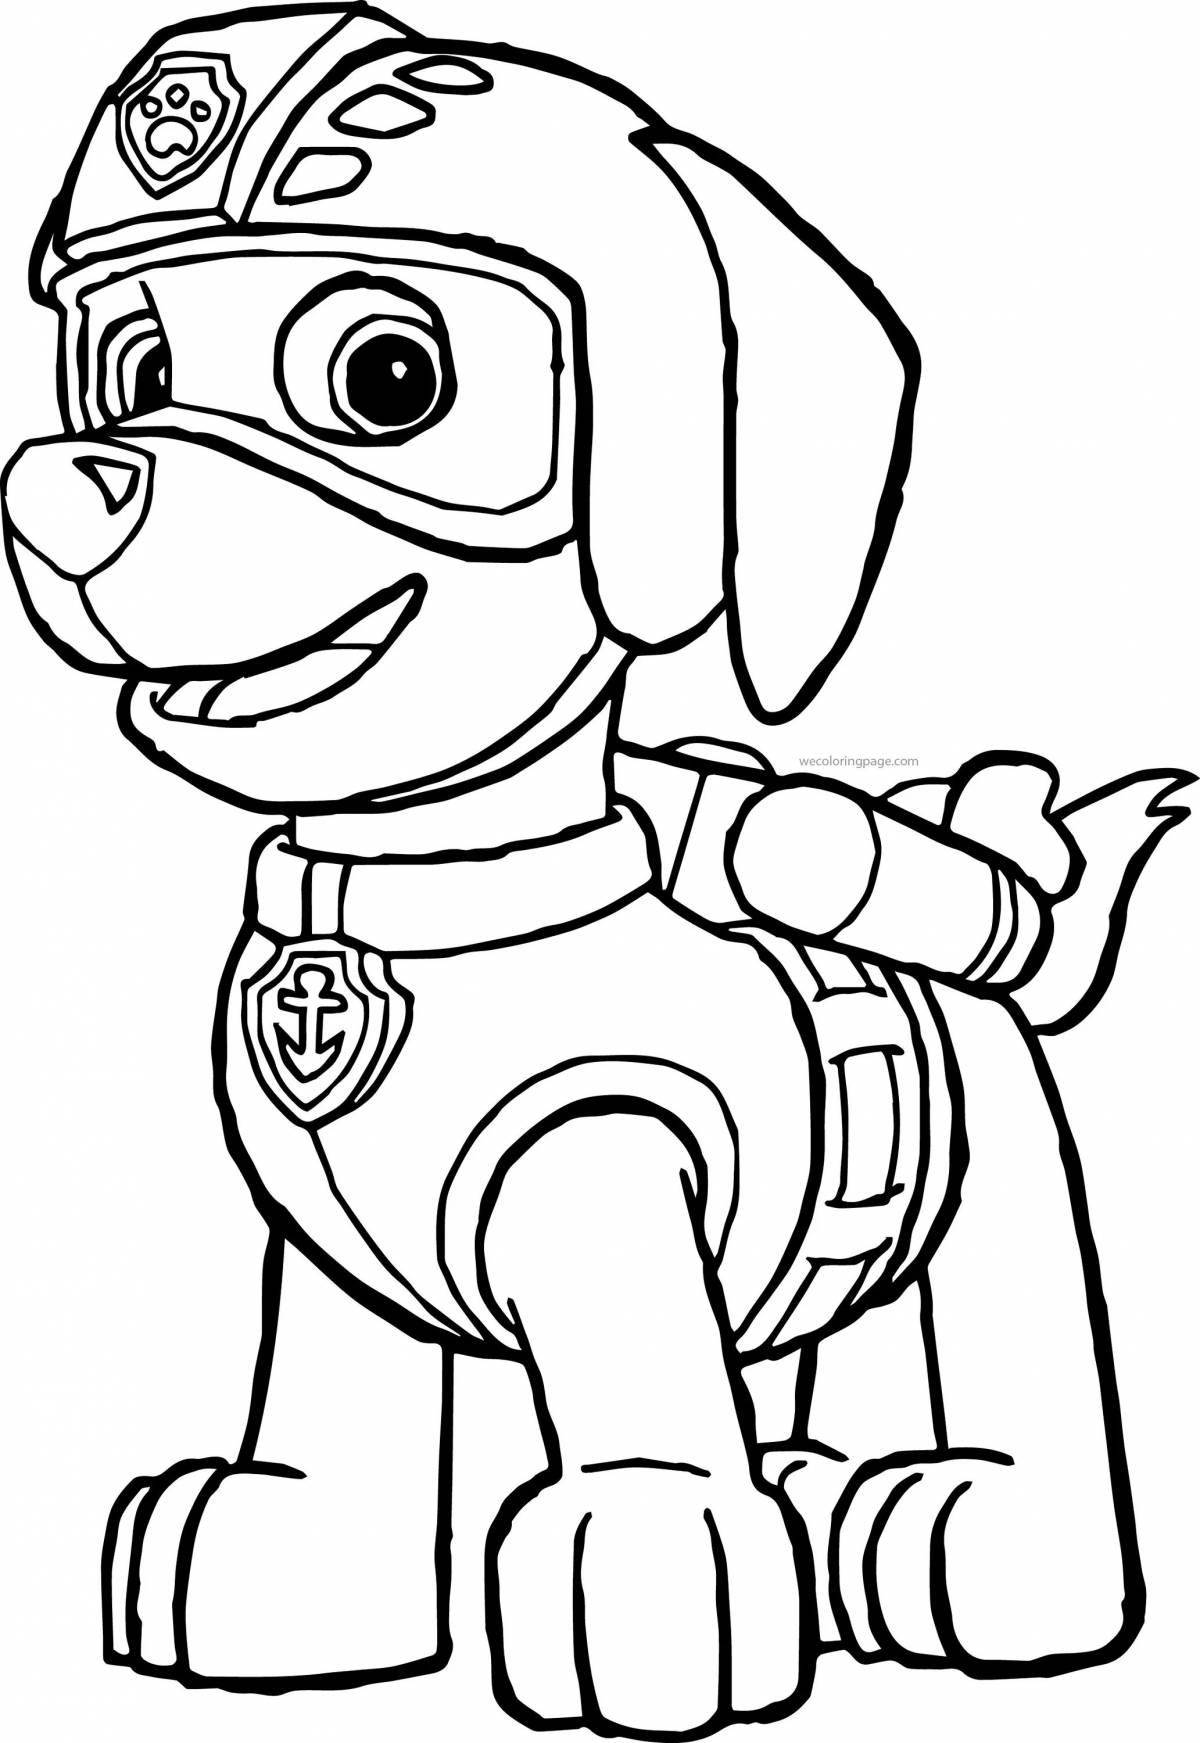 Attractive paw patrol coloring page for boys